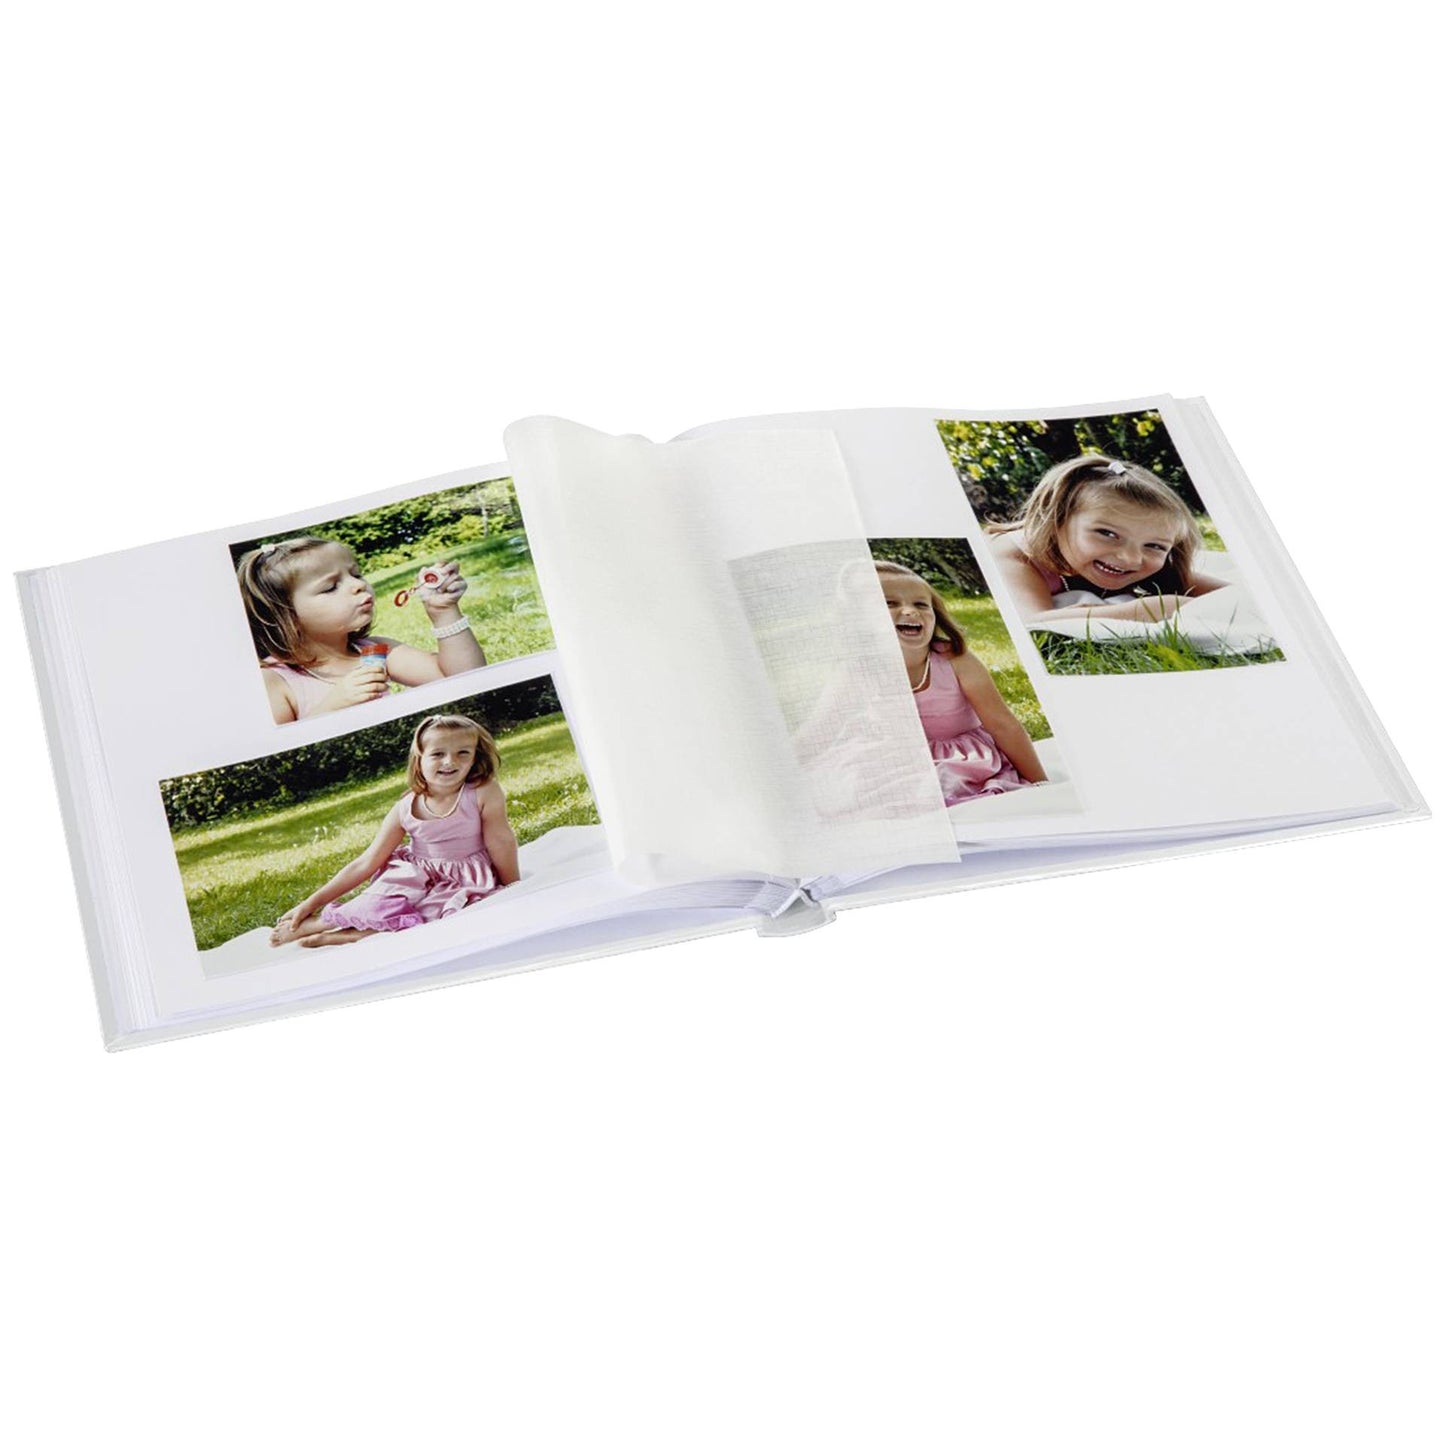 Forest Animal Scrapbook Photo Album - 100 Pages - 12x12 Inches